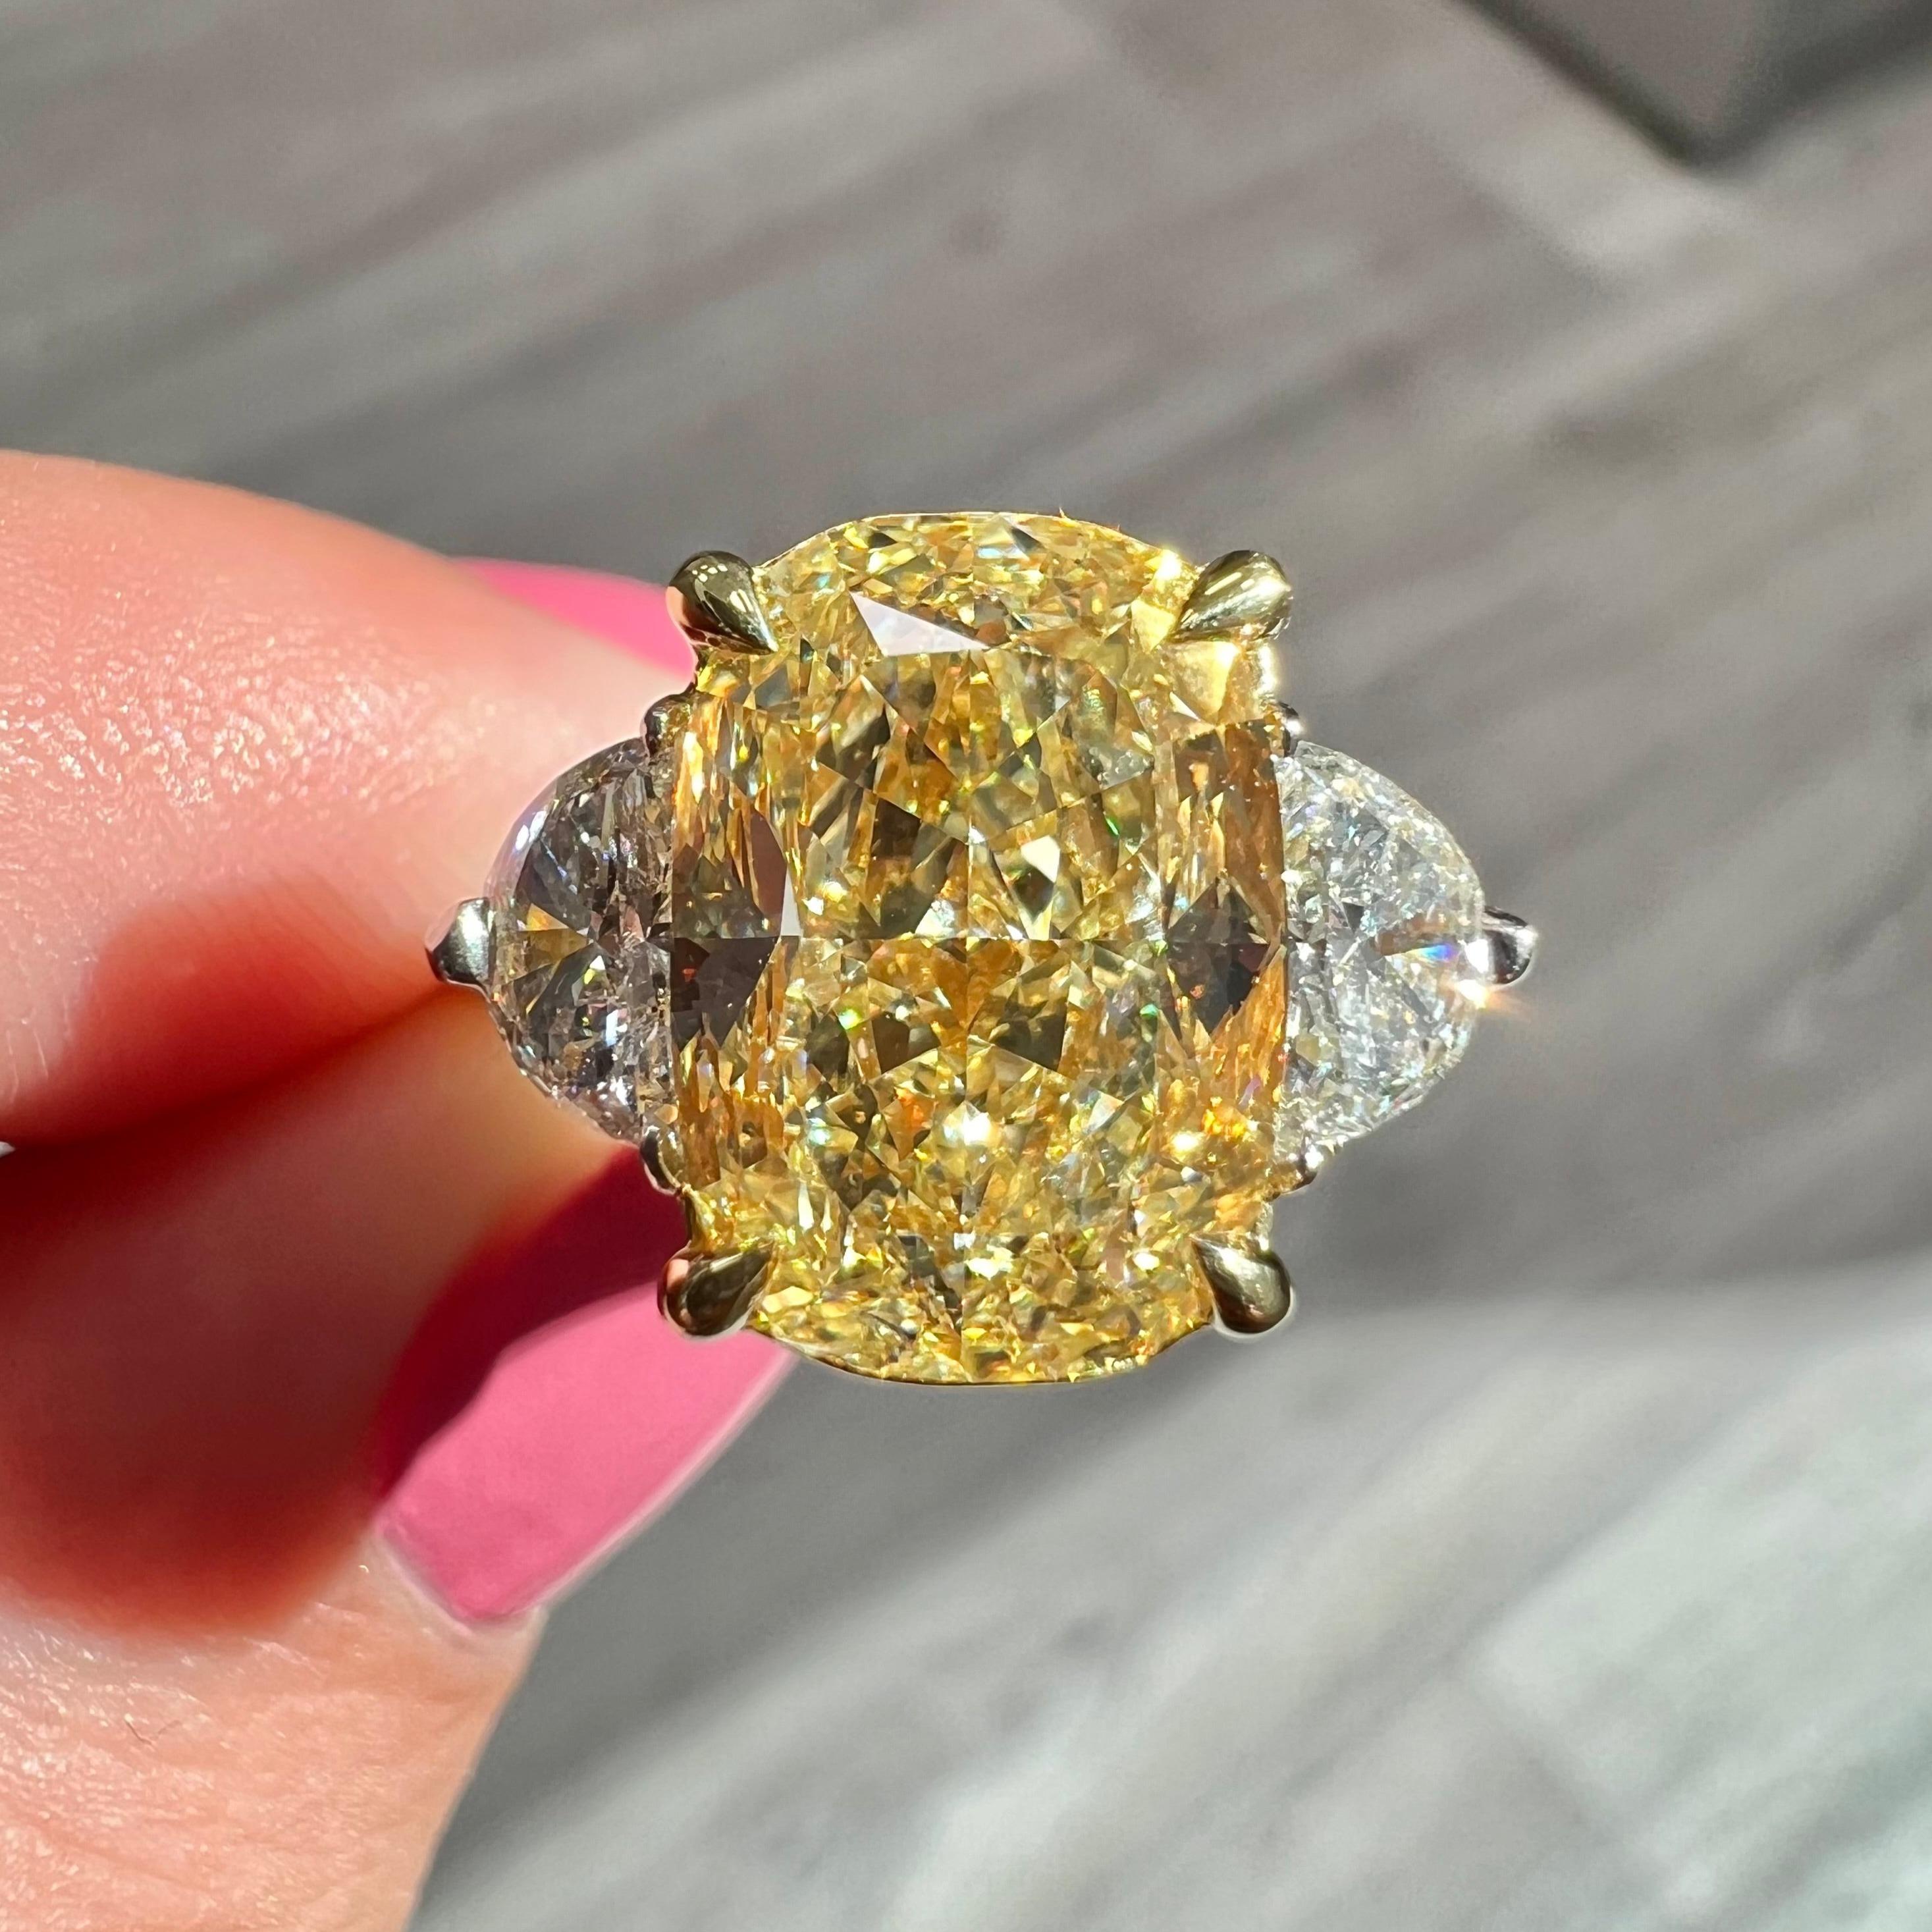 Top stone that will stand out among other Fancy Yellows
Full of life and 10/10 lemon yellow color
Set in Platinum and 18kt Yellow Gold with 0.33ct F VS Half Moons
100% eye clean and no negative effect from the Fluorescence 

Making Extraordinary